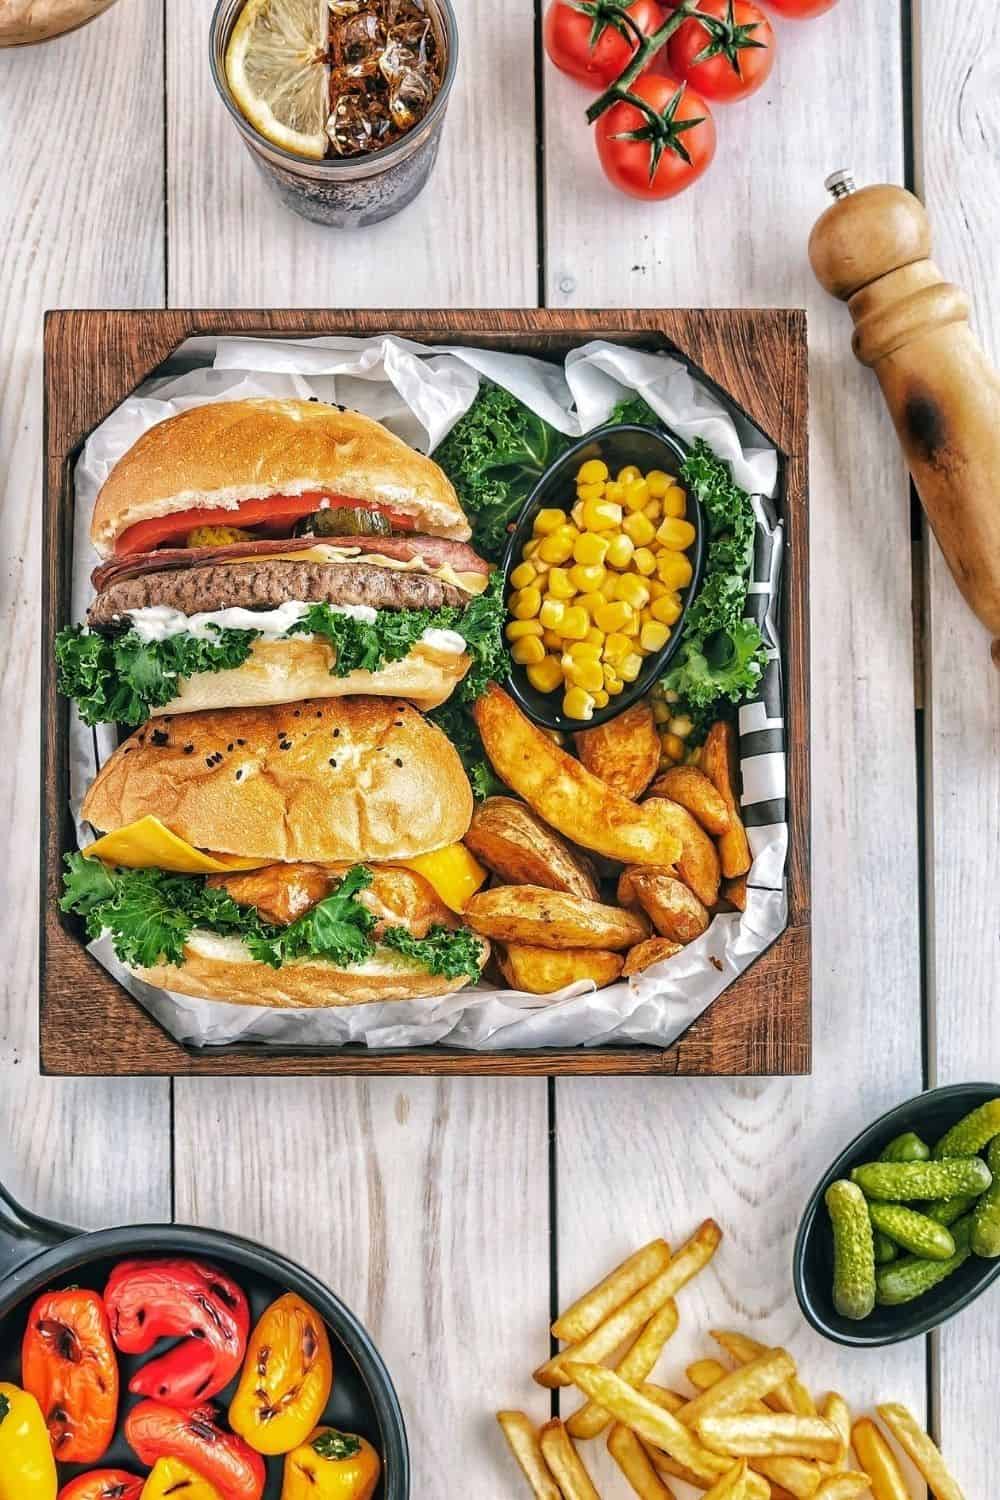 Grilled hamburger with side dishes